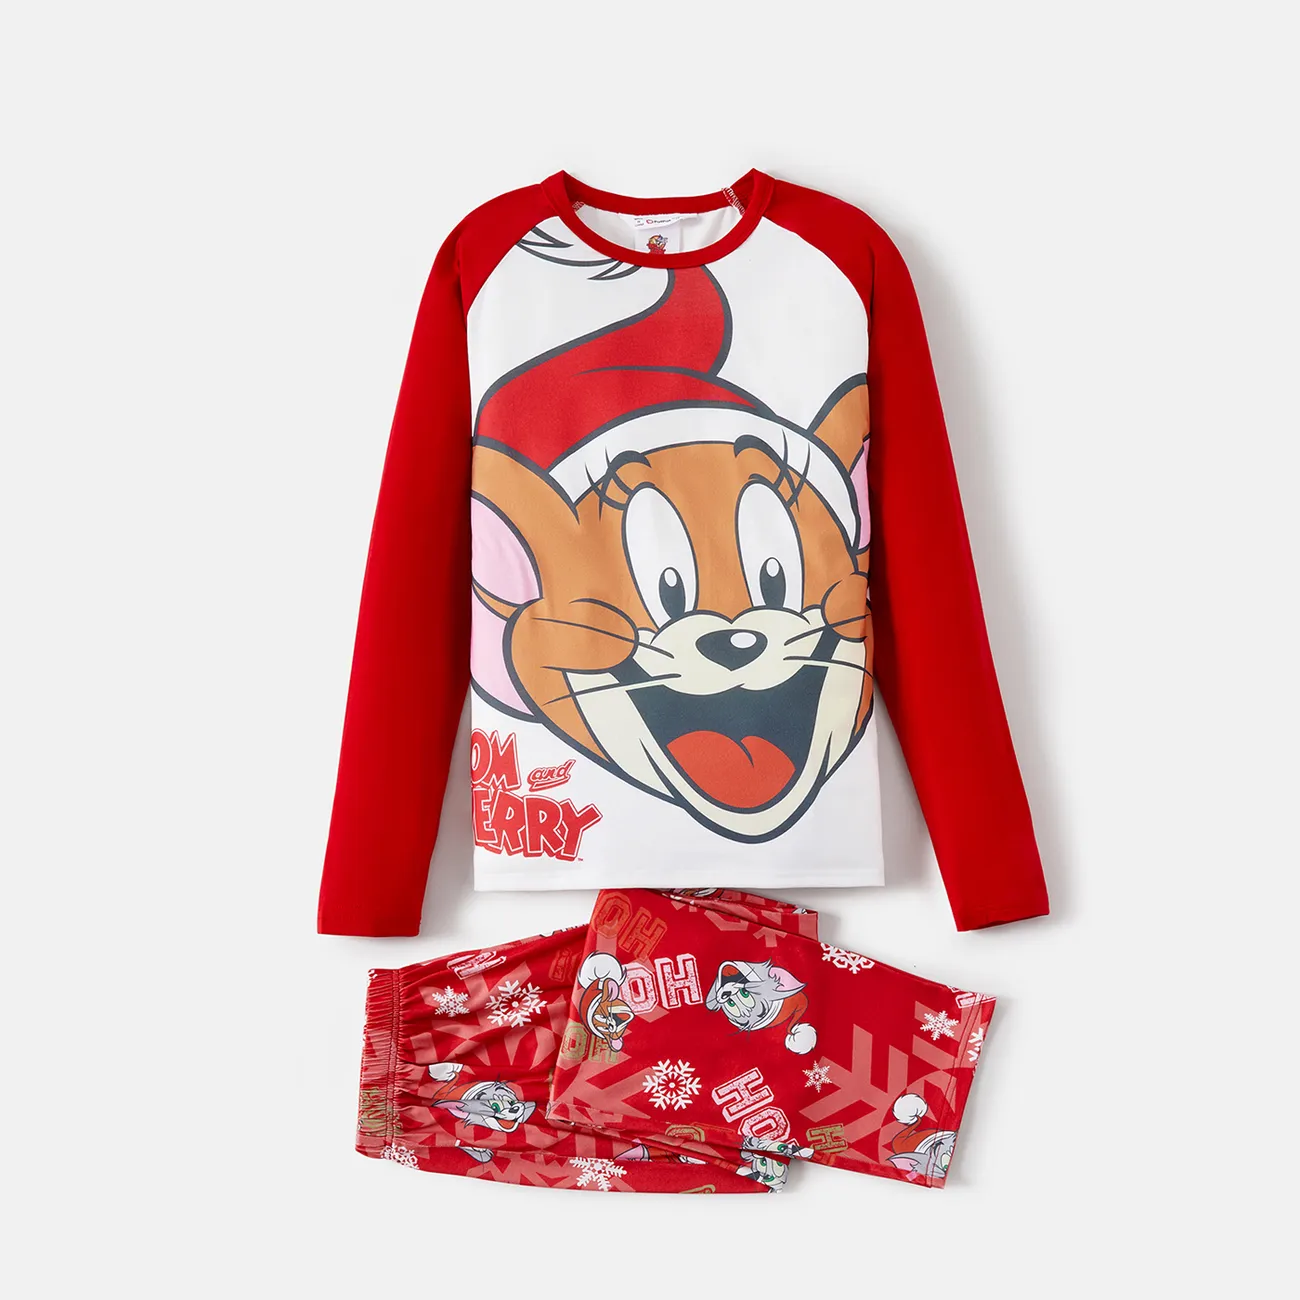 Tom and Jerry Noël Look Familial Manches longues Tenues de famille assorties Pyjamas (Flame Resistant) Rouge big image 1